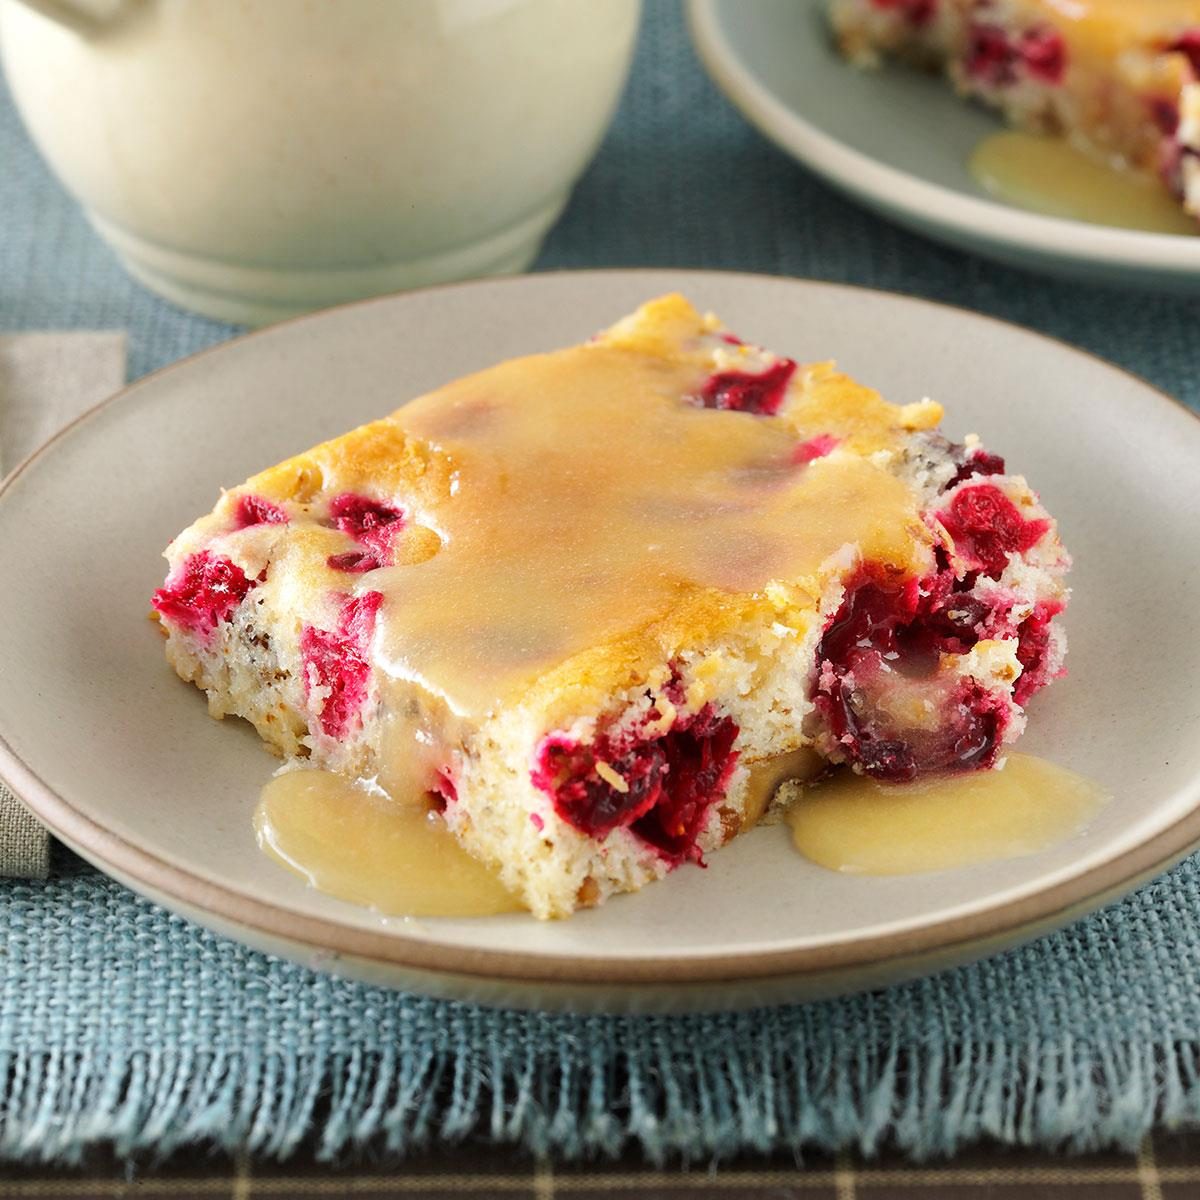 Cranberry-Walnut Cake with Butter Sauce